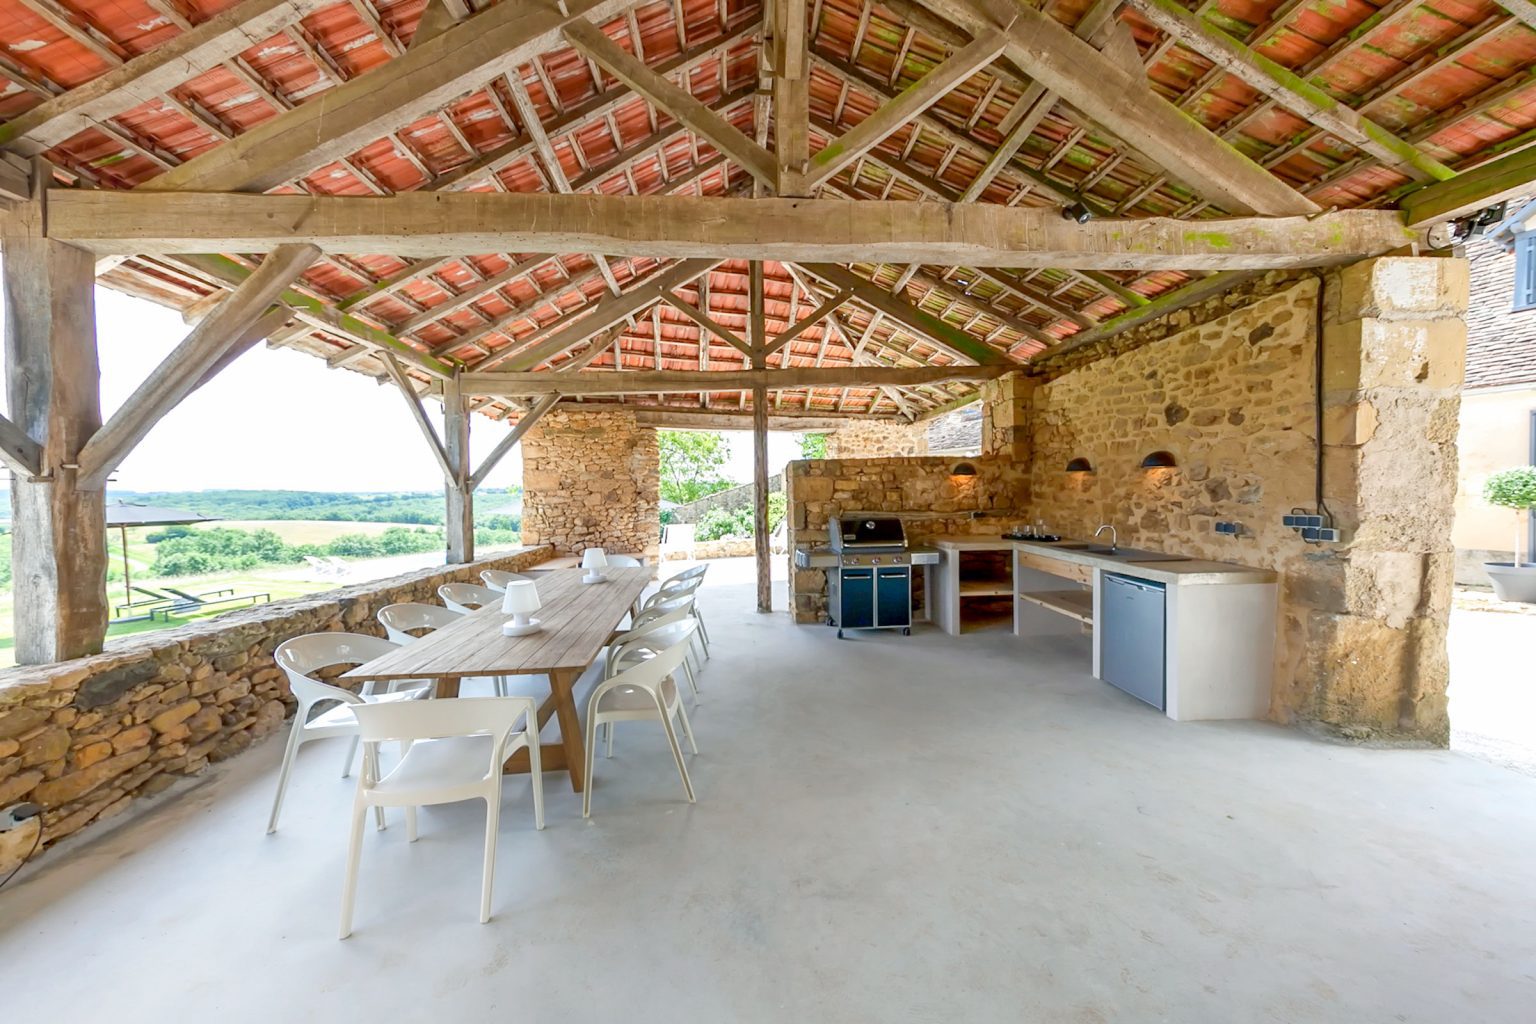 Shaded and covered summer kitchen and dining area with stunning hilltop views